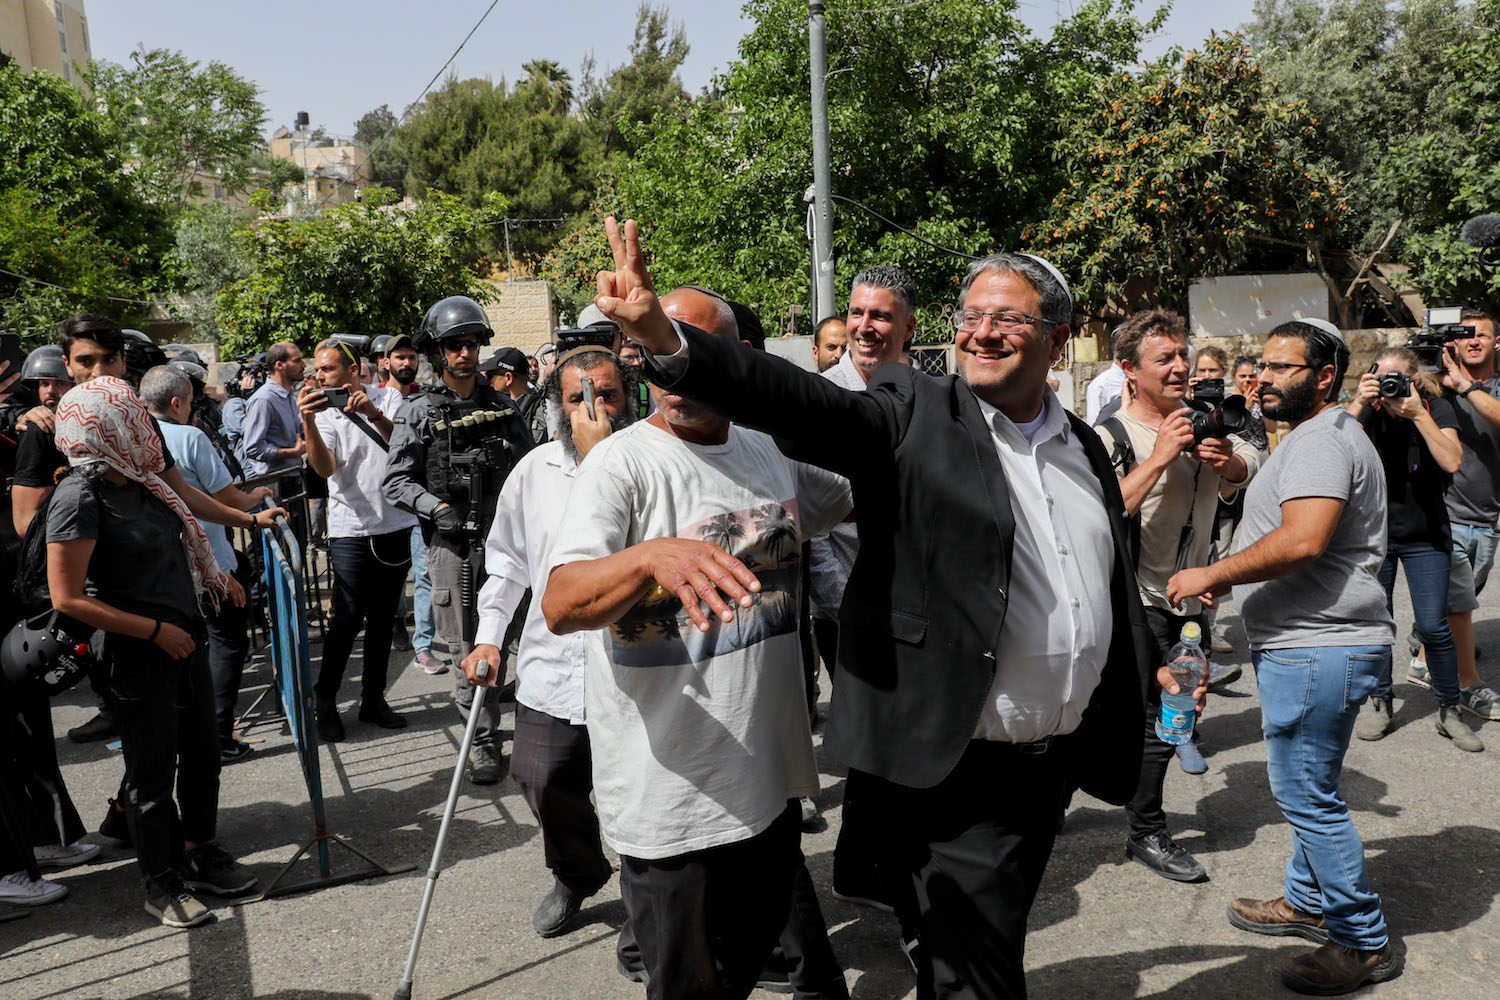 MK Itamar Ben Gvir and members of his far-right Religious Zionist Party visit the East Jerusalem neighborhood of Sheikh Jarrah to show support for settlers trying to evict Palestinians there, May 10, 2021 (Olivier Fitoussi/Flash90)